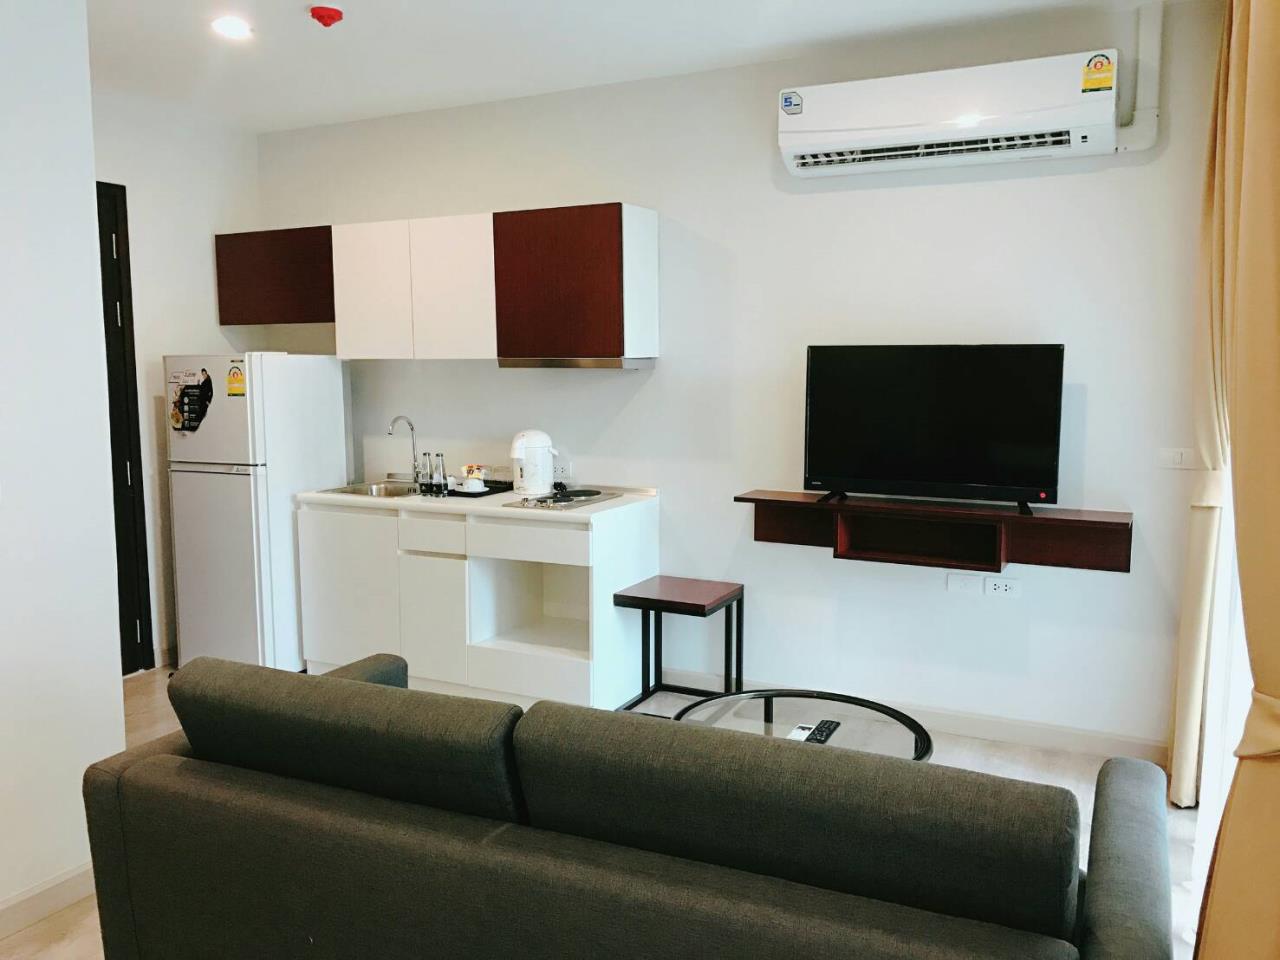 Agent - Arnupharp Sadudee Agency's New Airport condo for sell, Phuket Airport Condo Project. Guaranteed return of 6% for 3 years. New Condo with furniture, appliances Near Phuket Airport 1 km. Nai Yang Beach 700 meters. 10